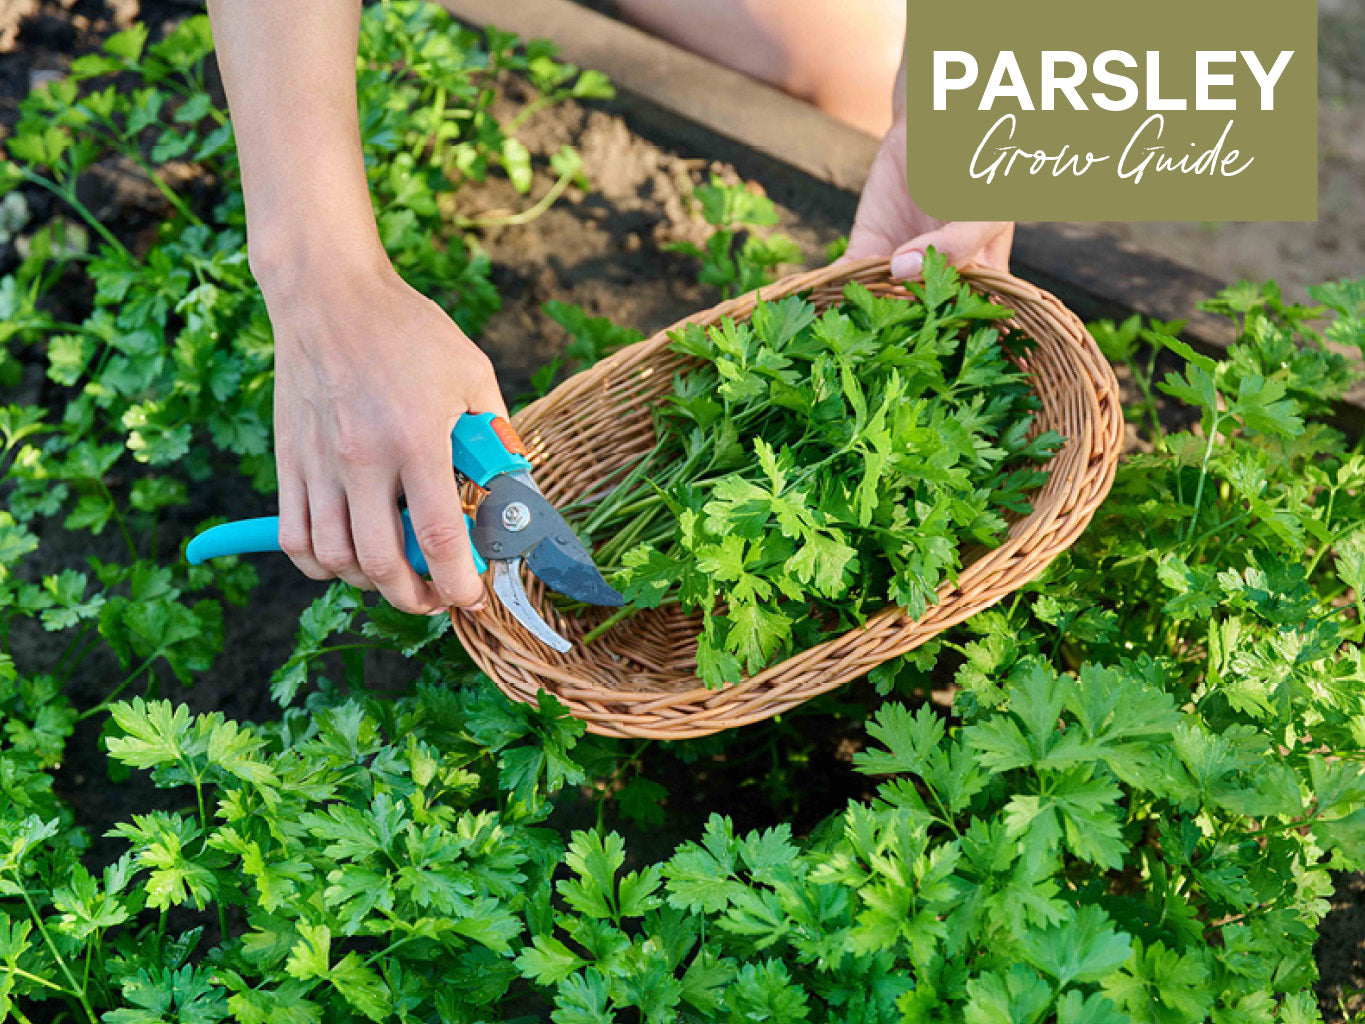 Parsley Grow Guide: How to Plant, Grow and Harvest Parsley